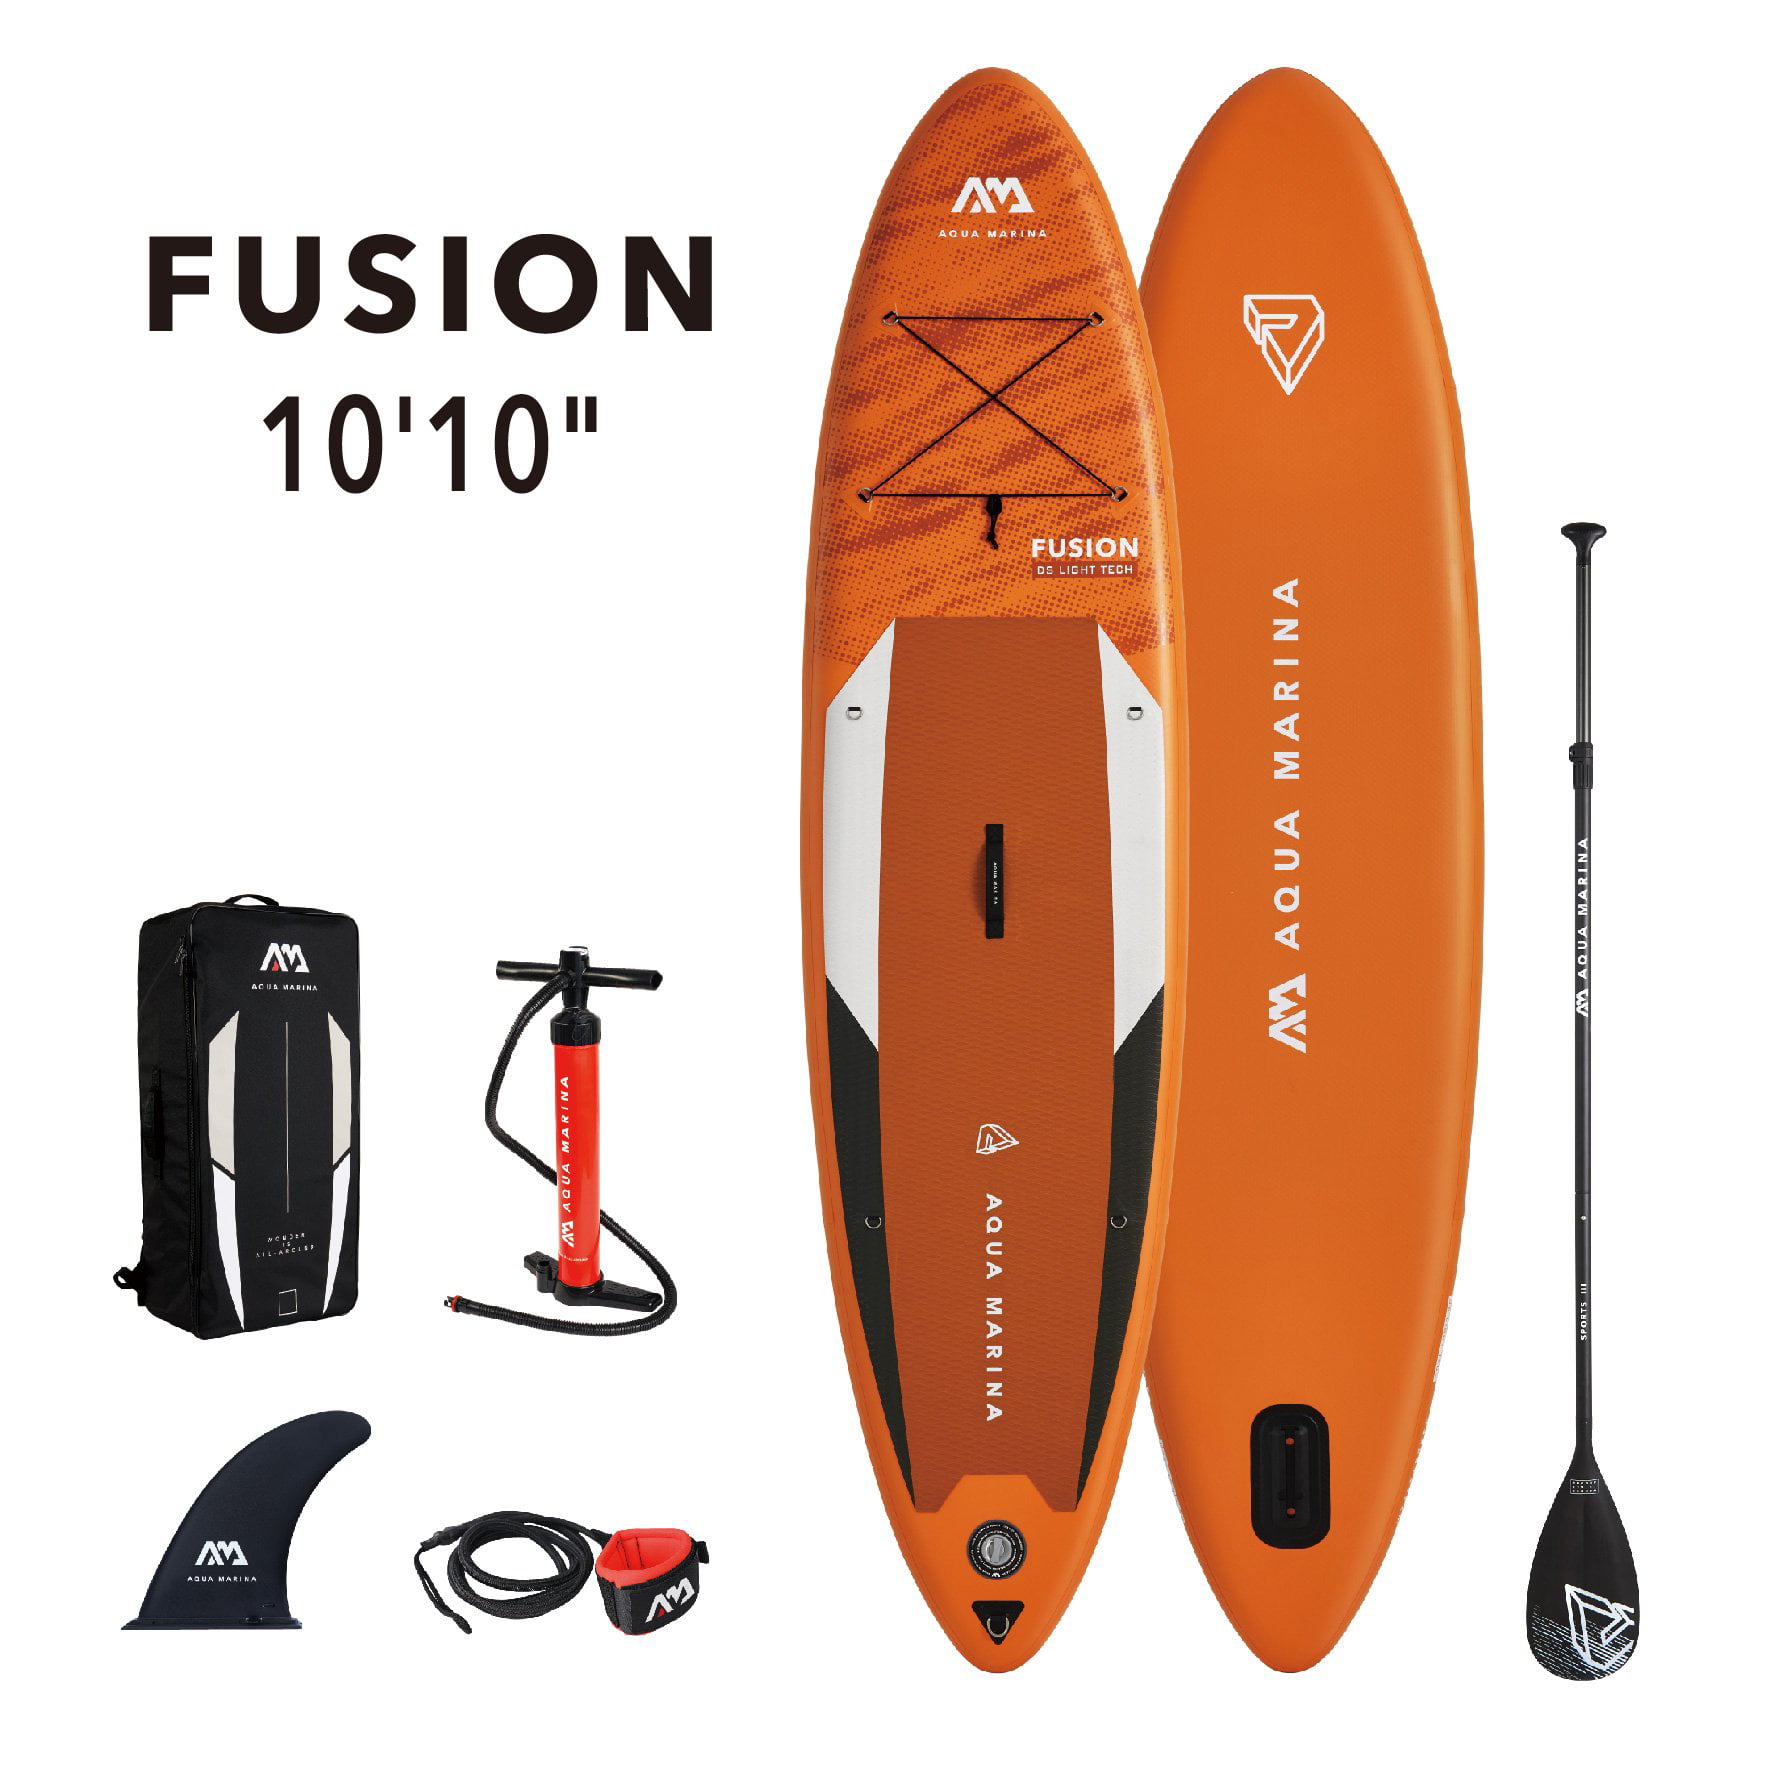 Marina - Inflatable Fin, Stand - Paddle, Pump Bag, SUP Paddle Safety Harness FUSION & Up Aqua including Package, Board Carry 1010